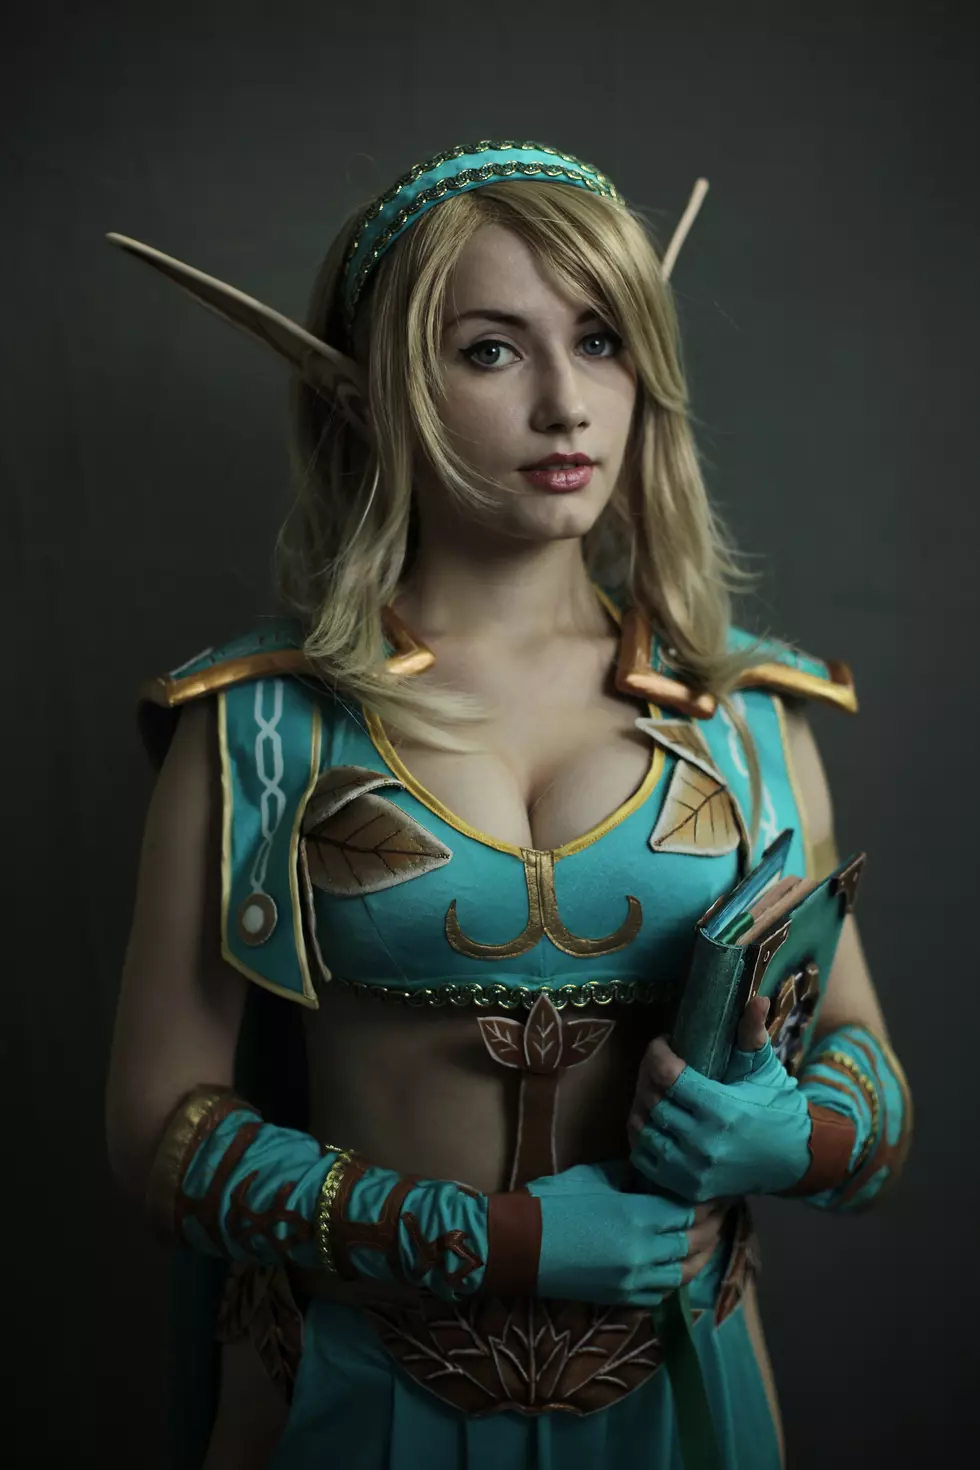 Hot Cosplay Babes of New York Comic Con